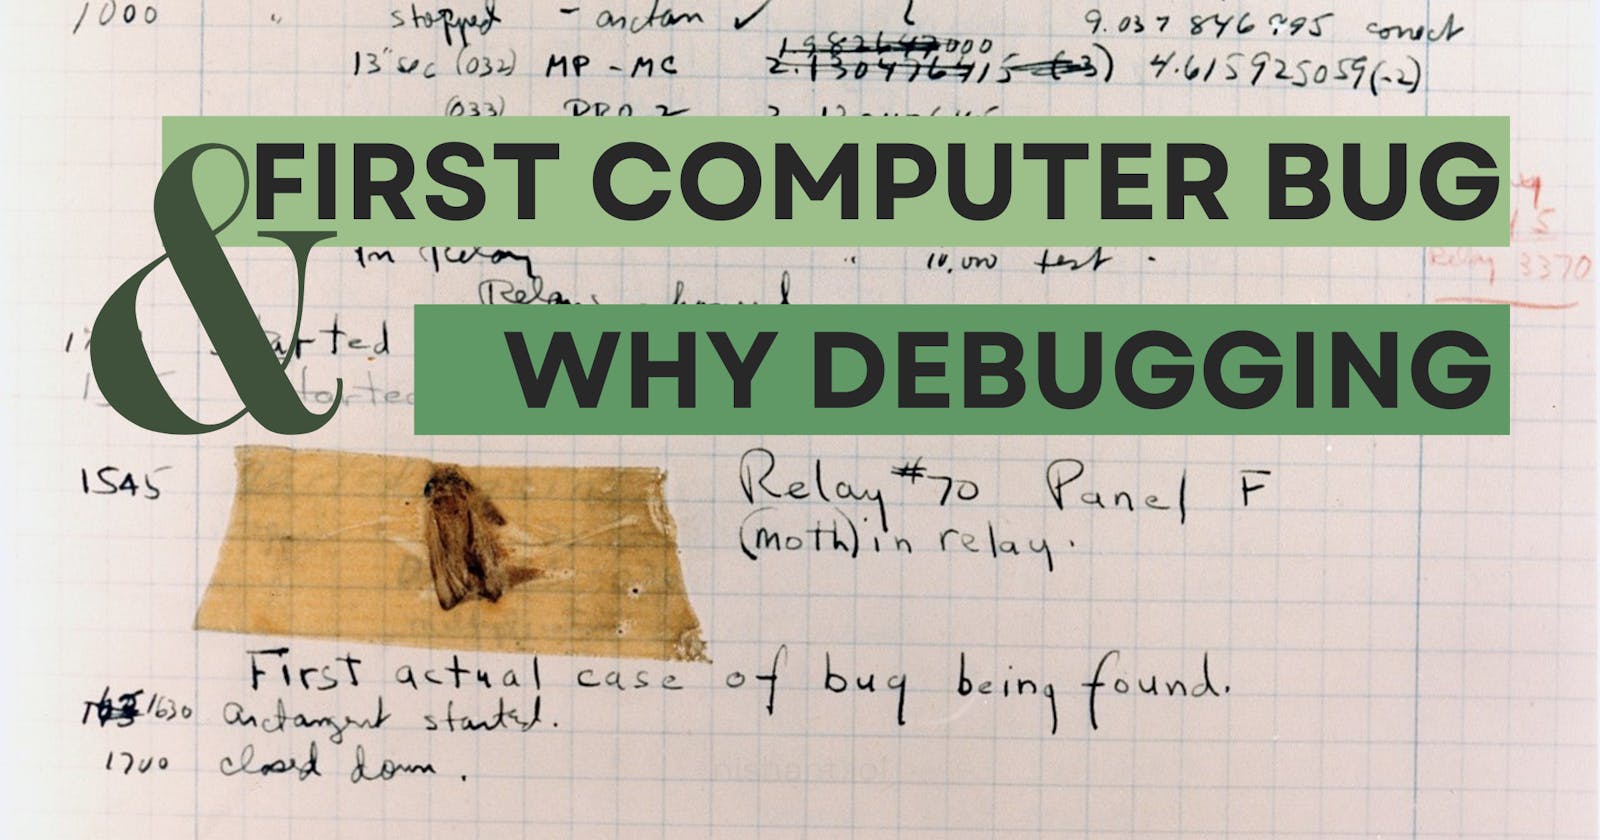 The First Computer Bug and why Debugging